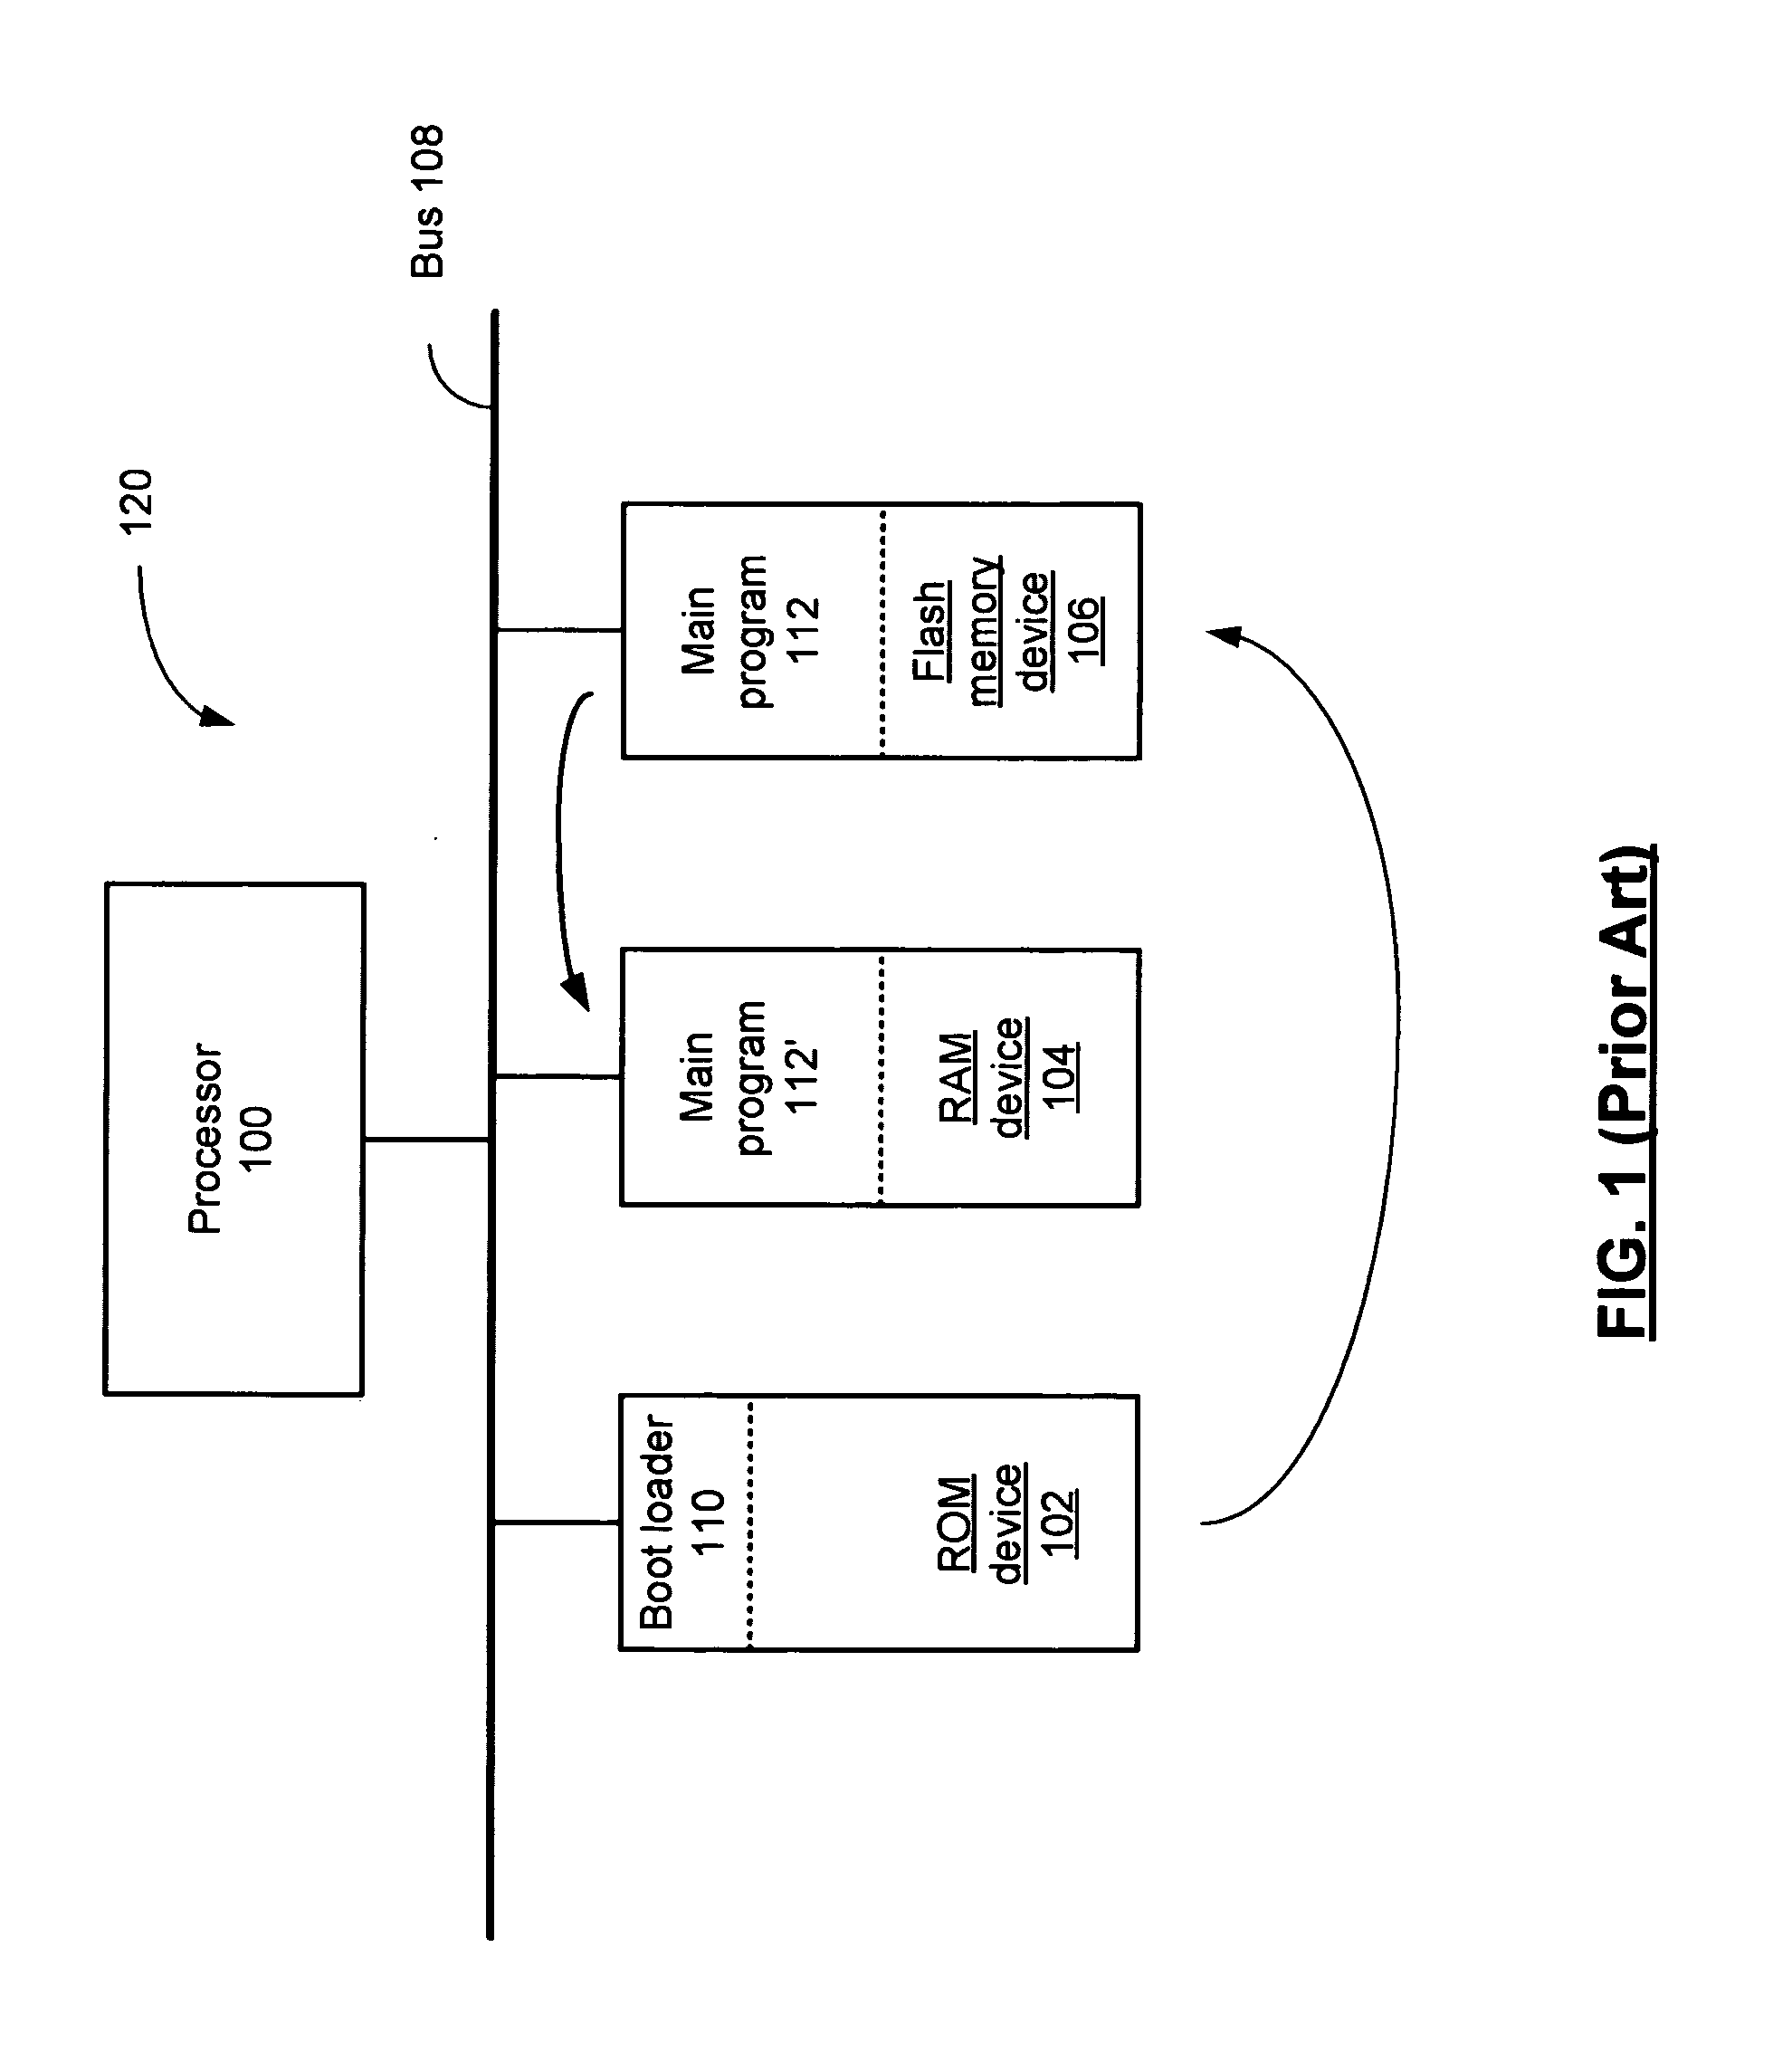 System on a chip integrated circuit, processing system and methods for use therewith